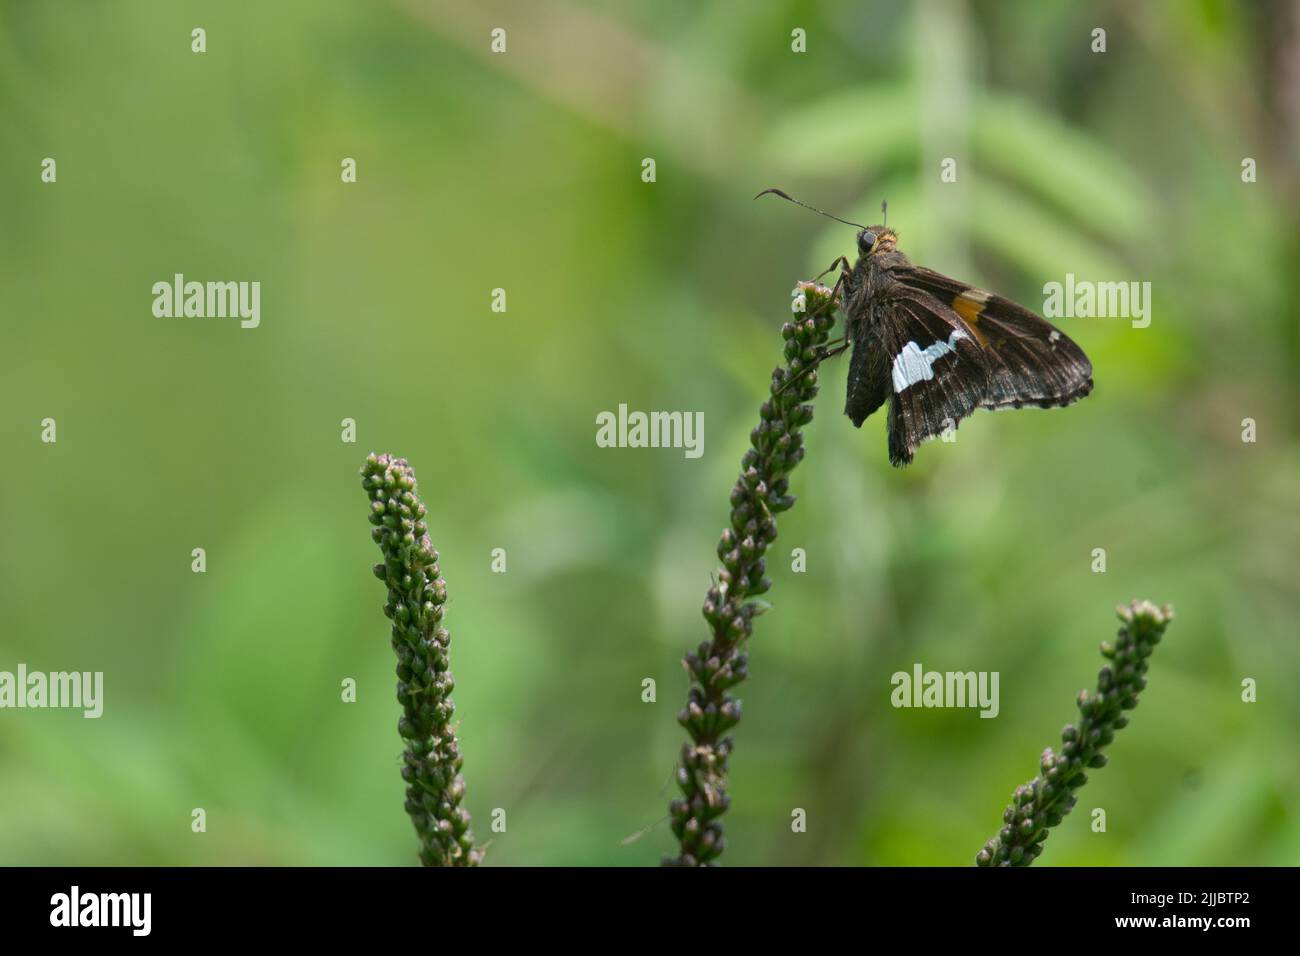 Small brown butterfly perched atop a green stalk Stock Photo